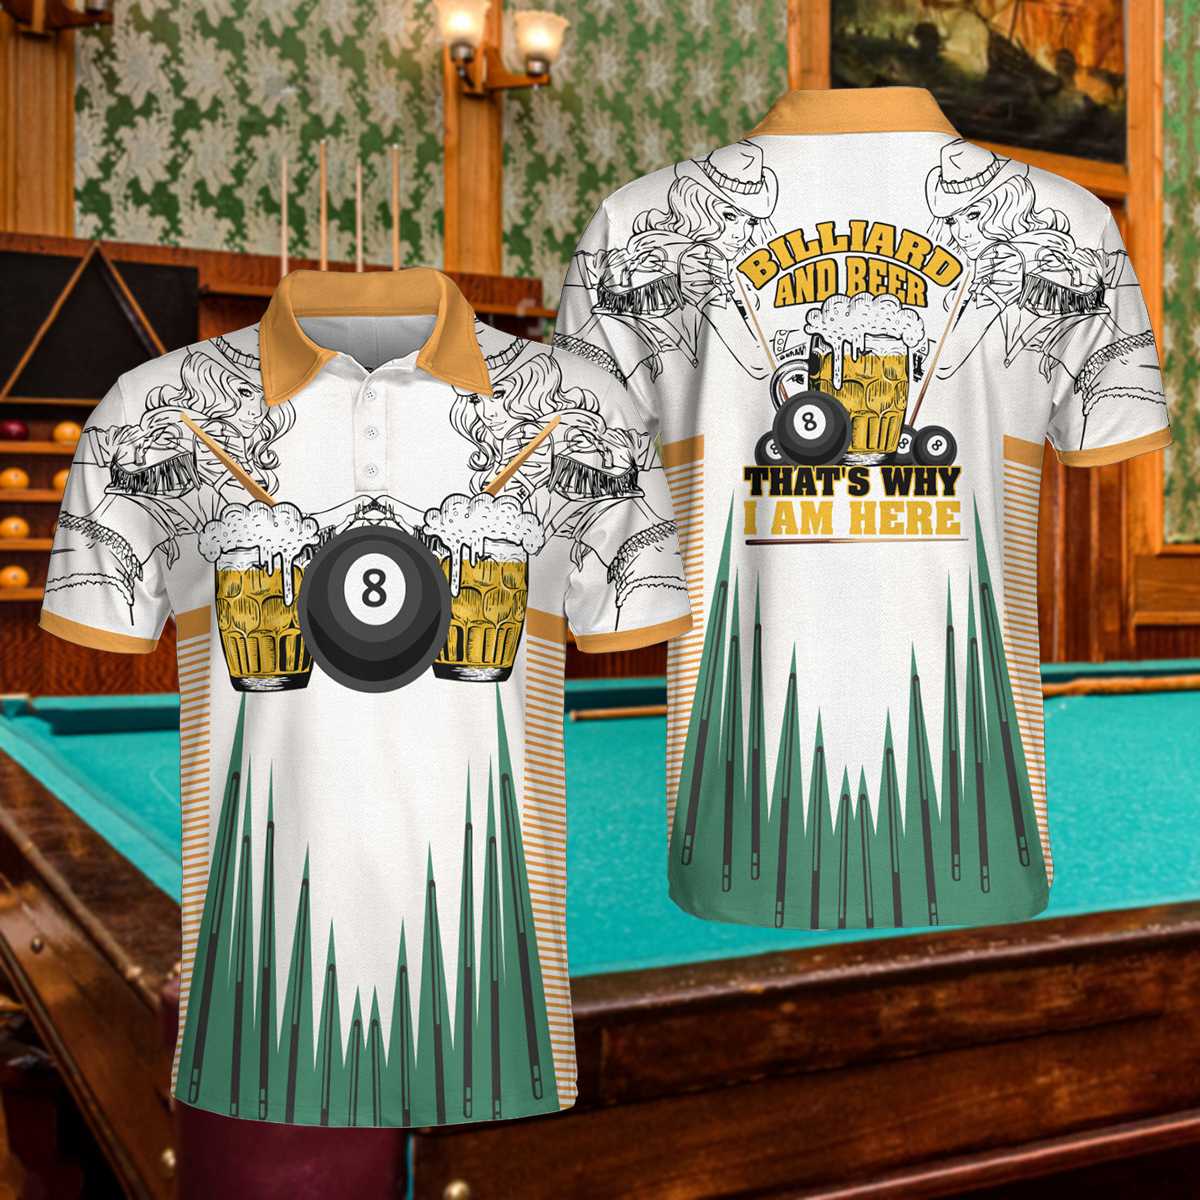 8-balls Billiards And Beer Cowgirl That's Why I Am Here Best Polo Shirt  For Men & Women  PO1714